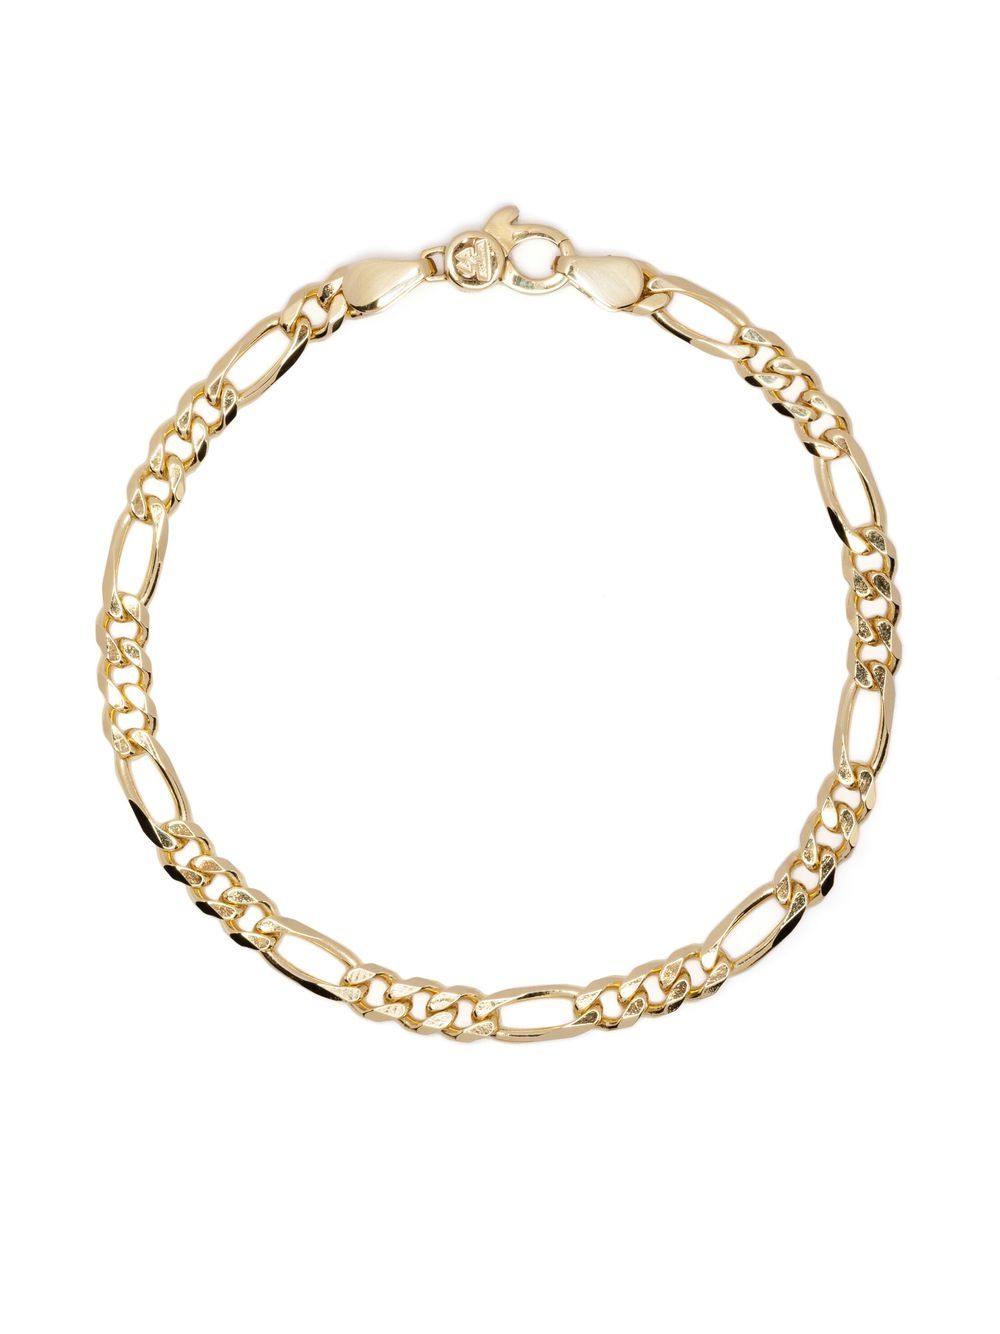 TOM WOOD 9KT YELLOW GOLD STERLING SILVER FIGARO CHAIN BRACELET